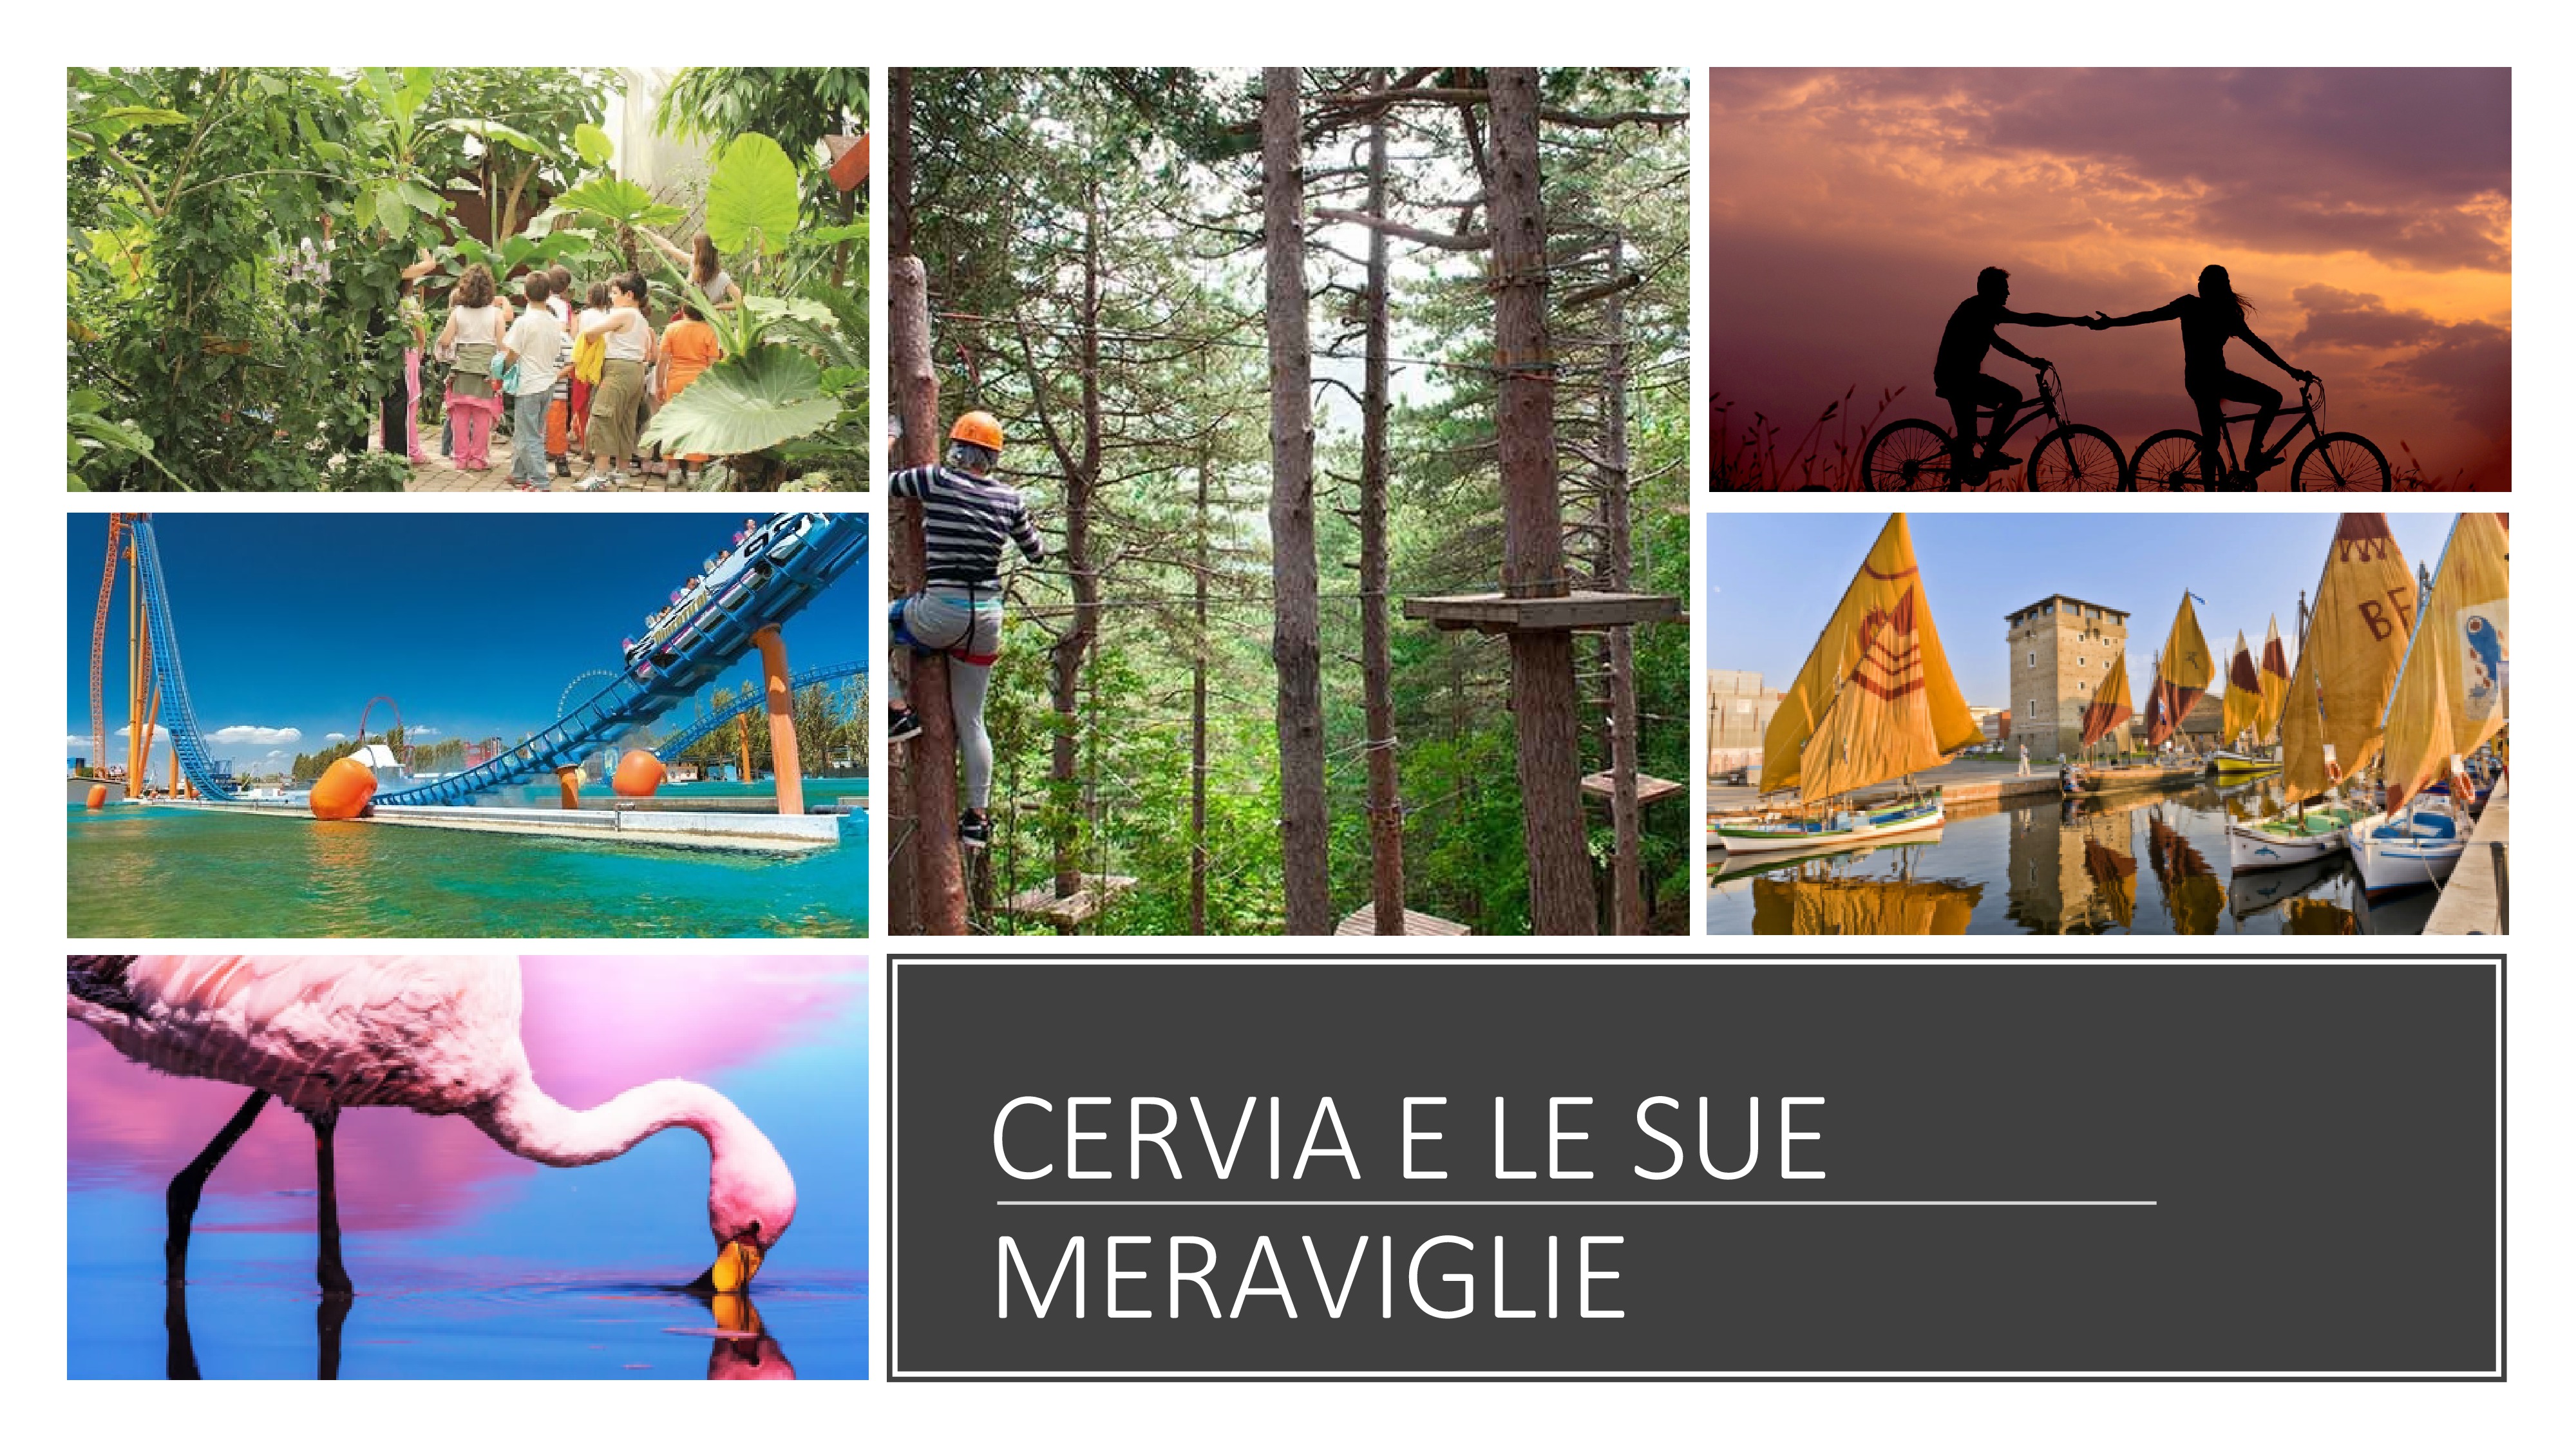 What to do in cervia